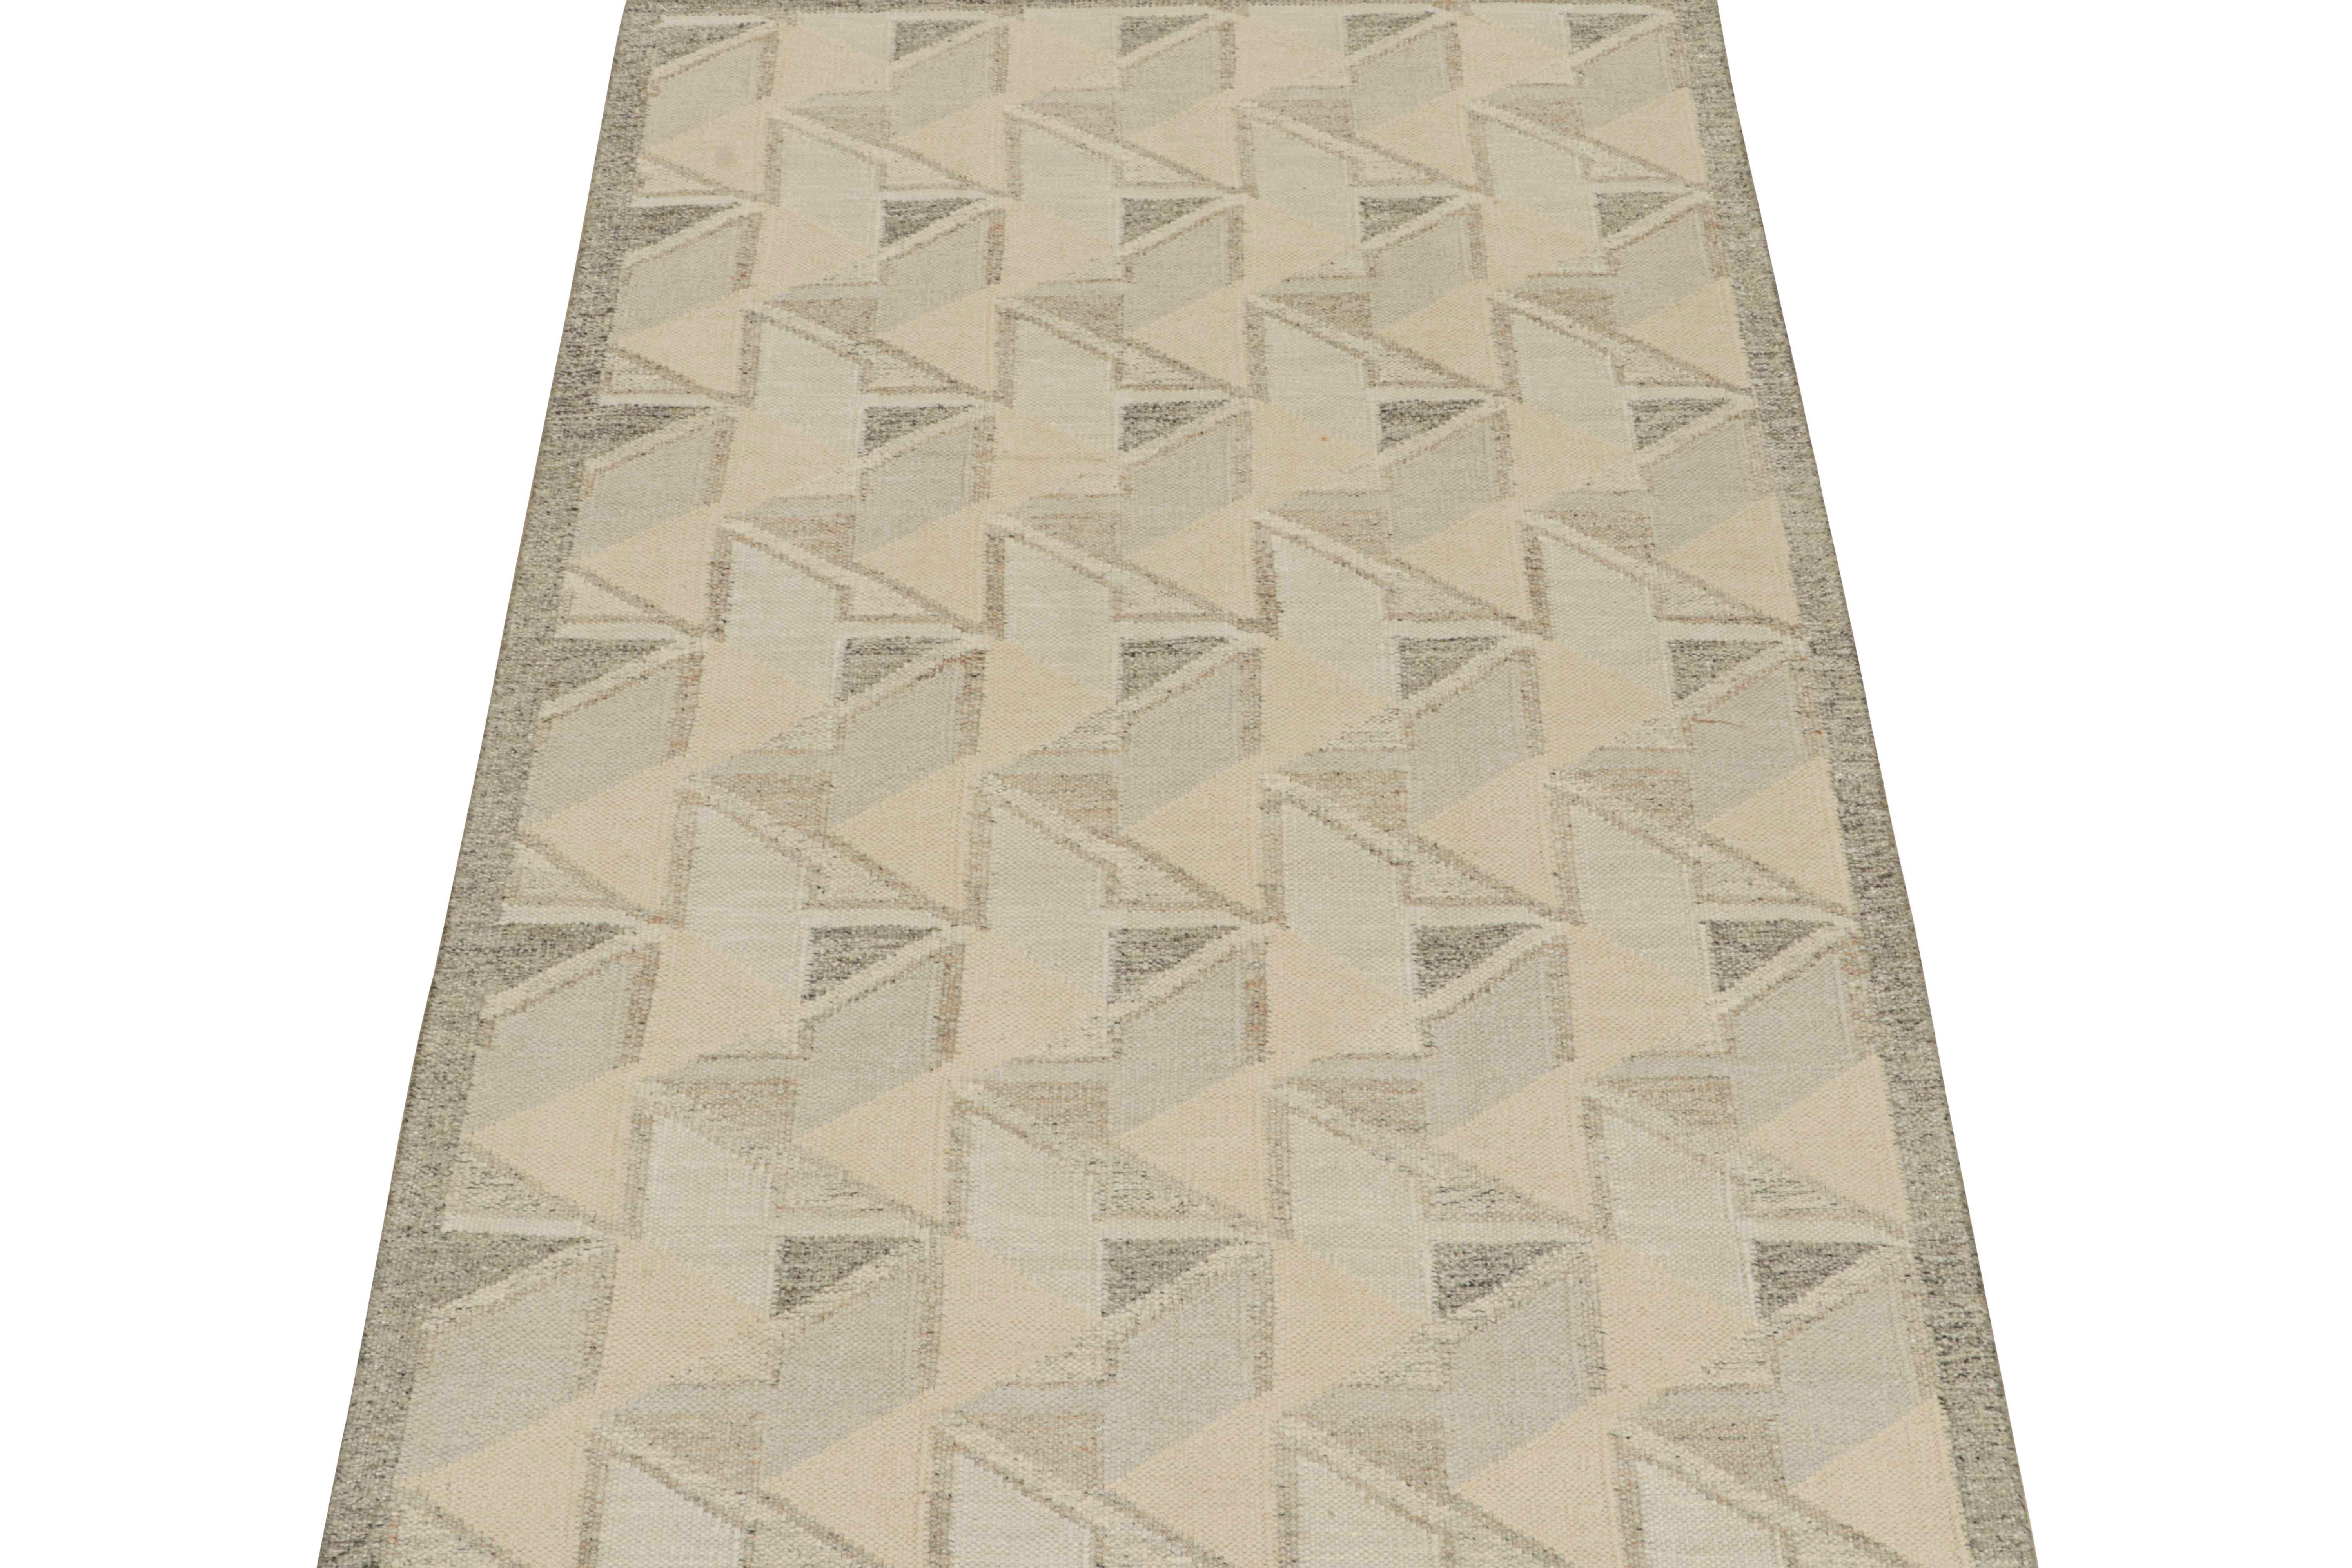 This 6 x9  flat weave is a new addition to the Scandinavian Kilim collection by Rug & Kilim. Handwoven in wool and natural yarns, its design reflects a contemporary take on mid-century Rollakans and Swedish Deco style.

On the design:

This new